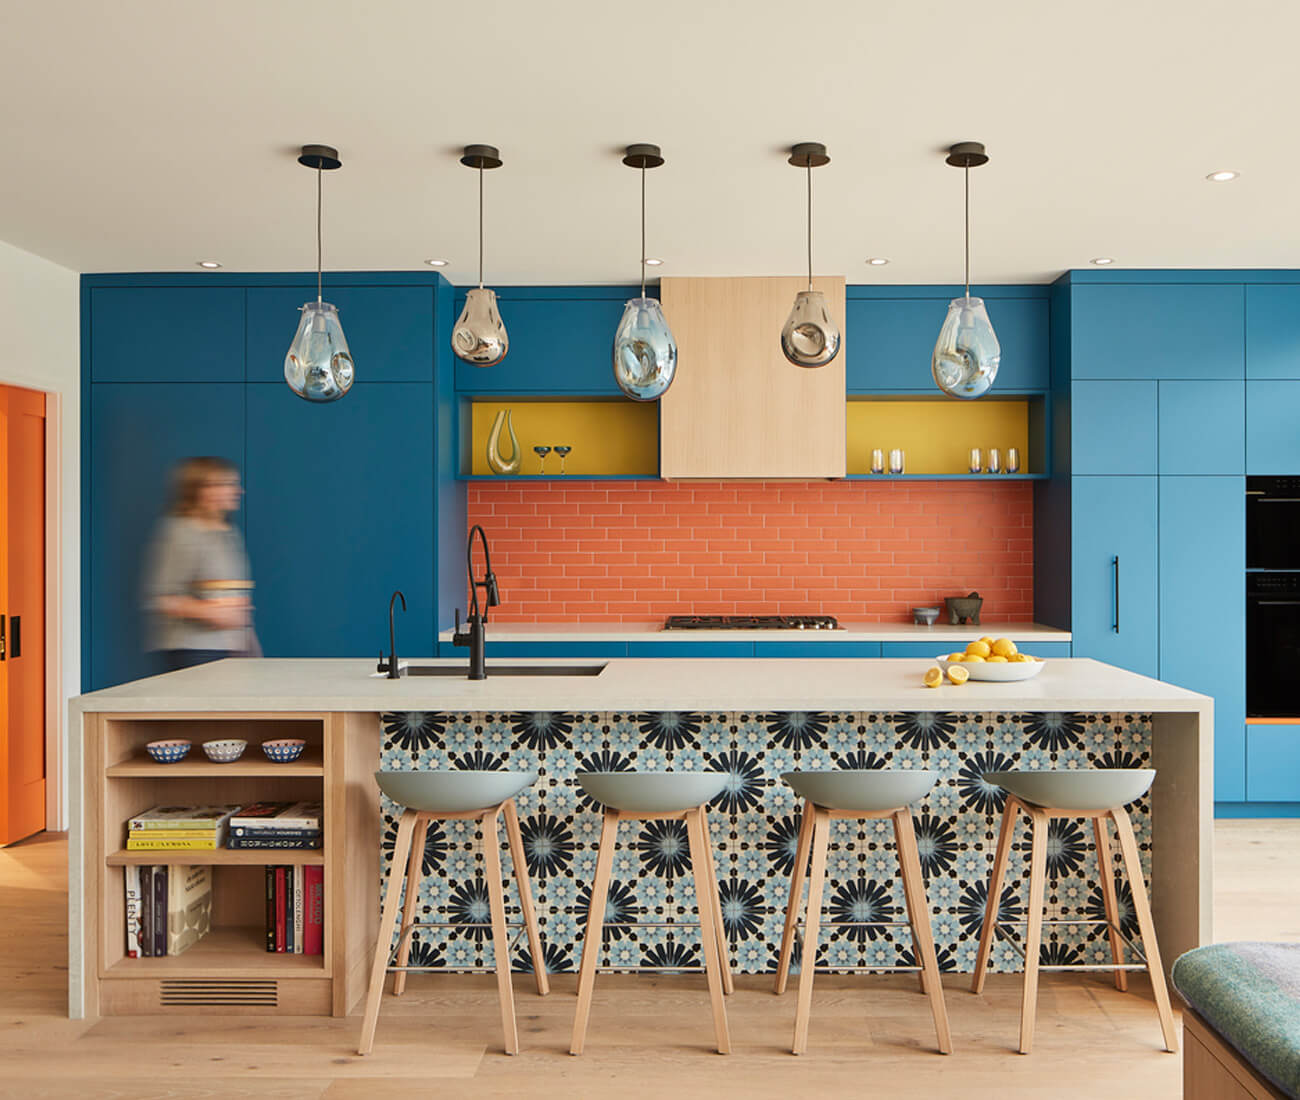 The island is clad in quartz from HanStone and backed by ocean blue millwork, orange subway tile, splashes of yellow and orange accents. Neutral elements, including wood shelving, black fixtures and Hay barstools, lend some restraint. The pendants are by AM Studio.